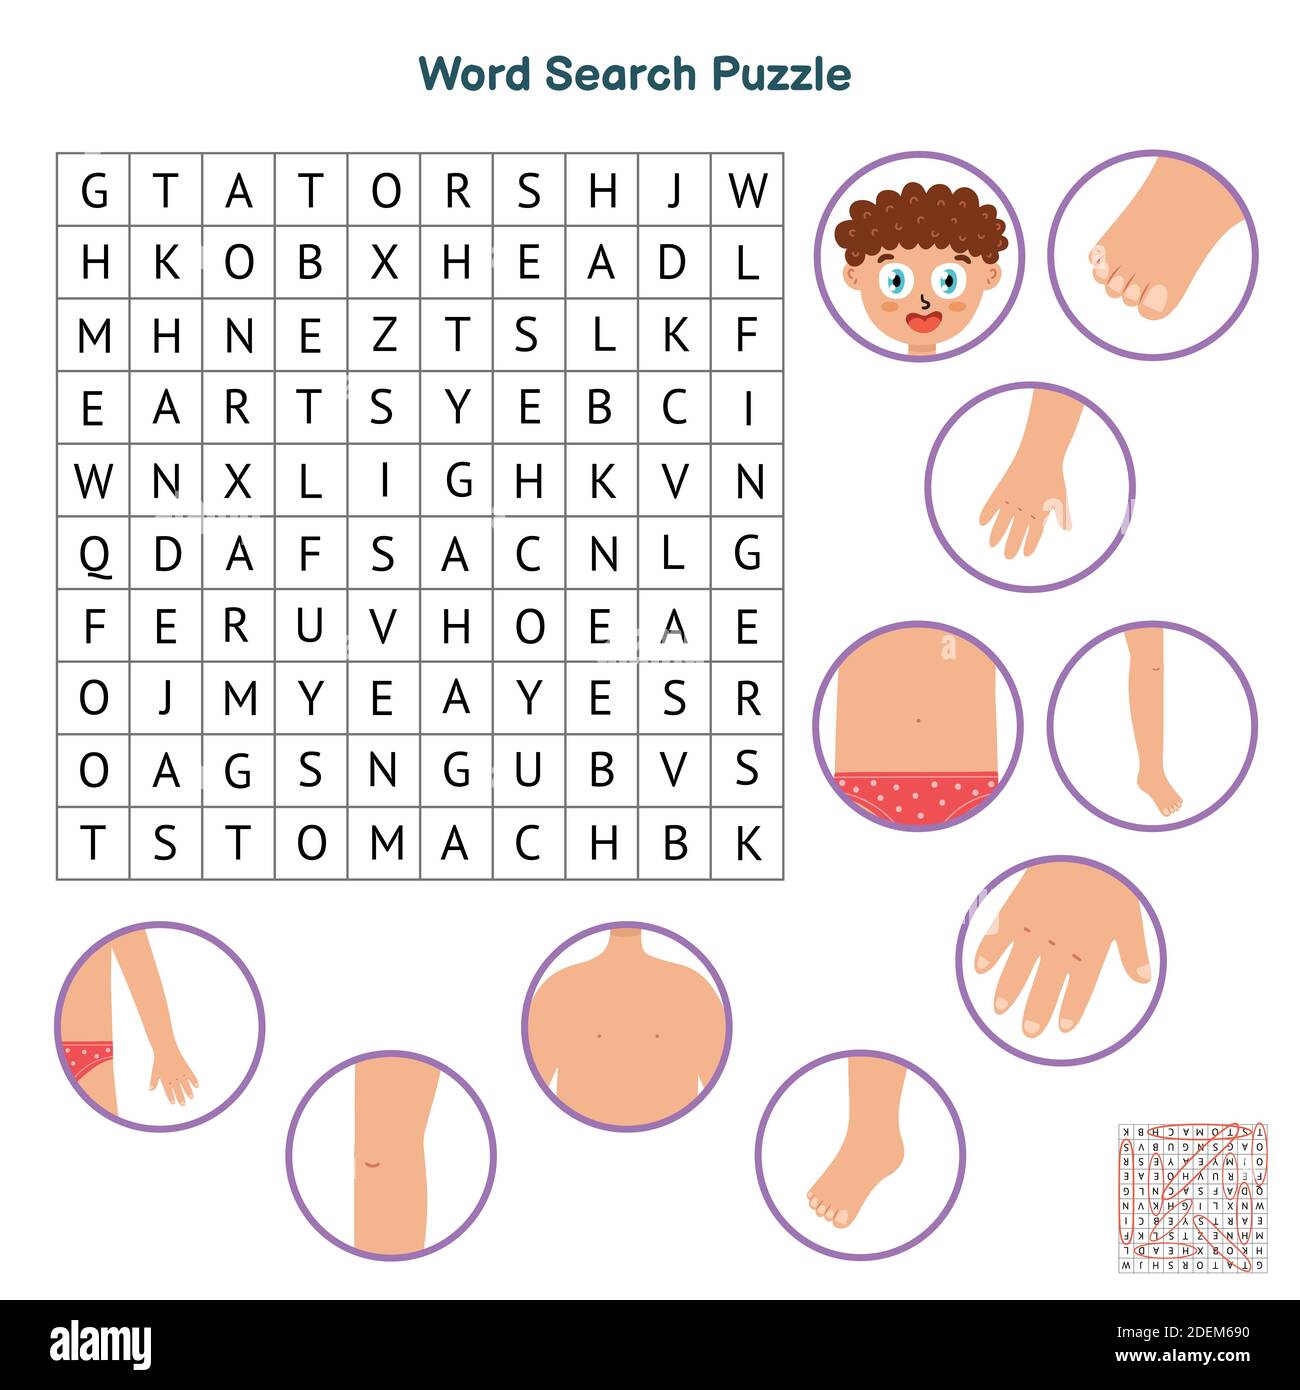 ekme-do-rusal-muhalefet-parts-of-the-body-puzzle-worksheets-travel